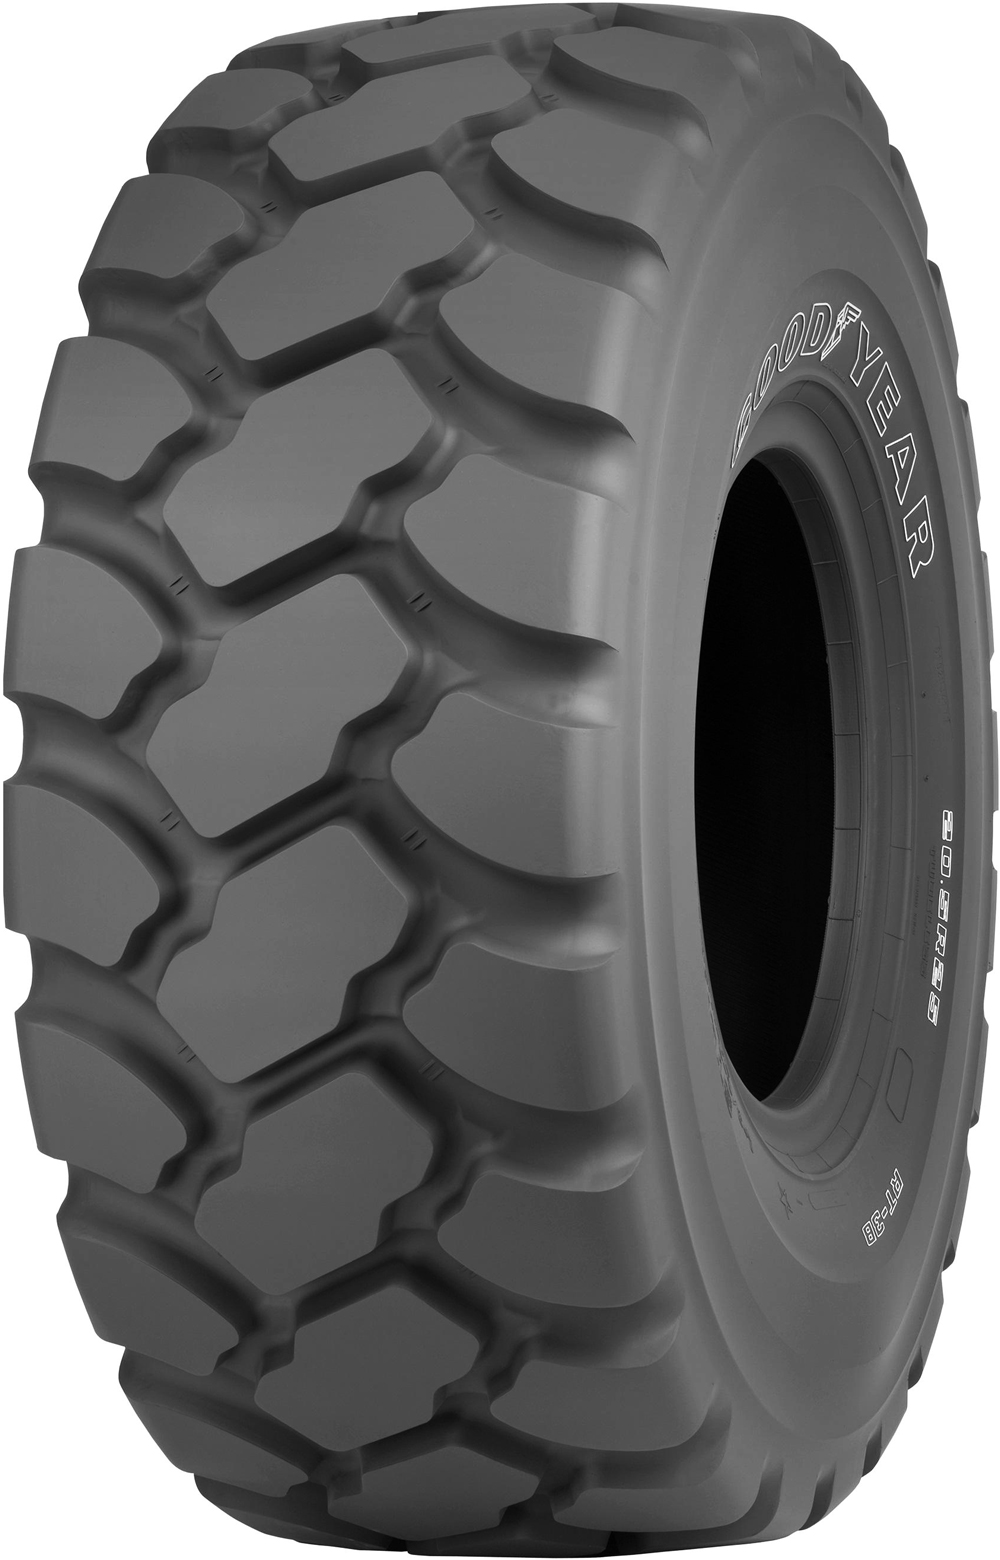 product_type-industrial_tires GOODYEAR RT-3B TL 17.5 R25 176A2